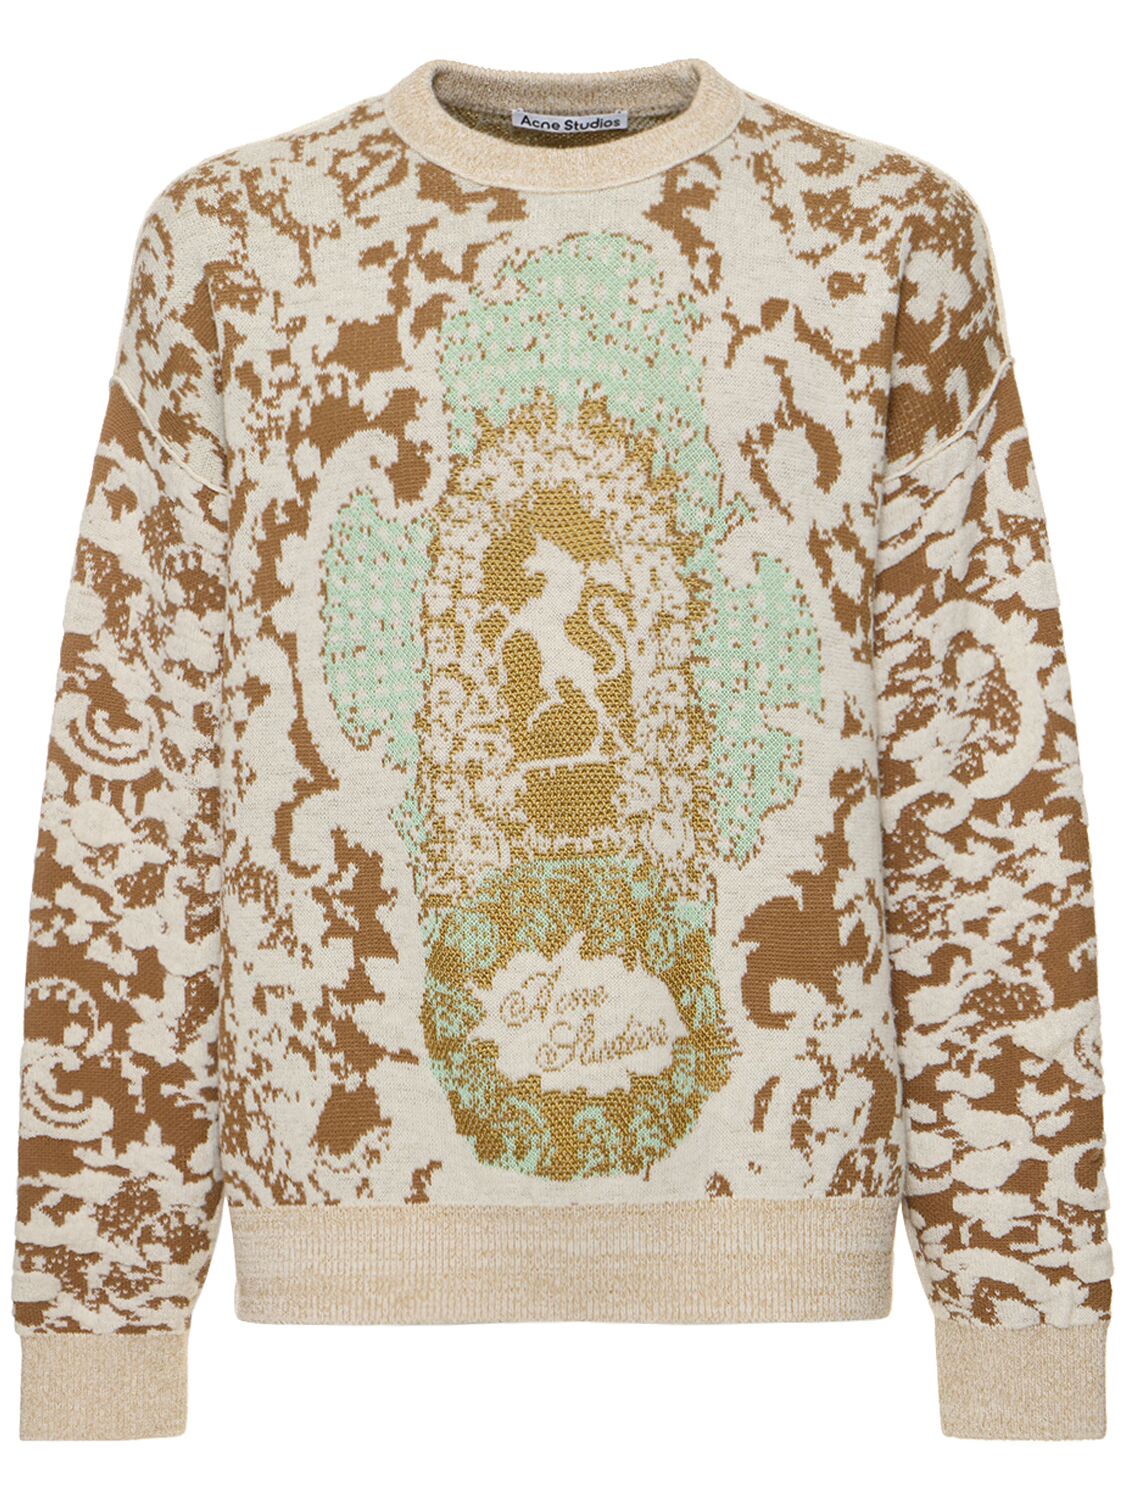 Image of Korse Love Letter Jacquard Wool Sweater